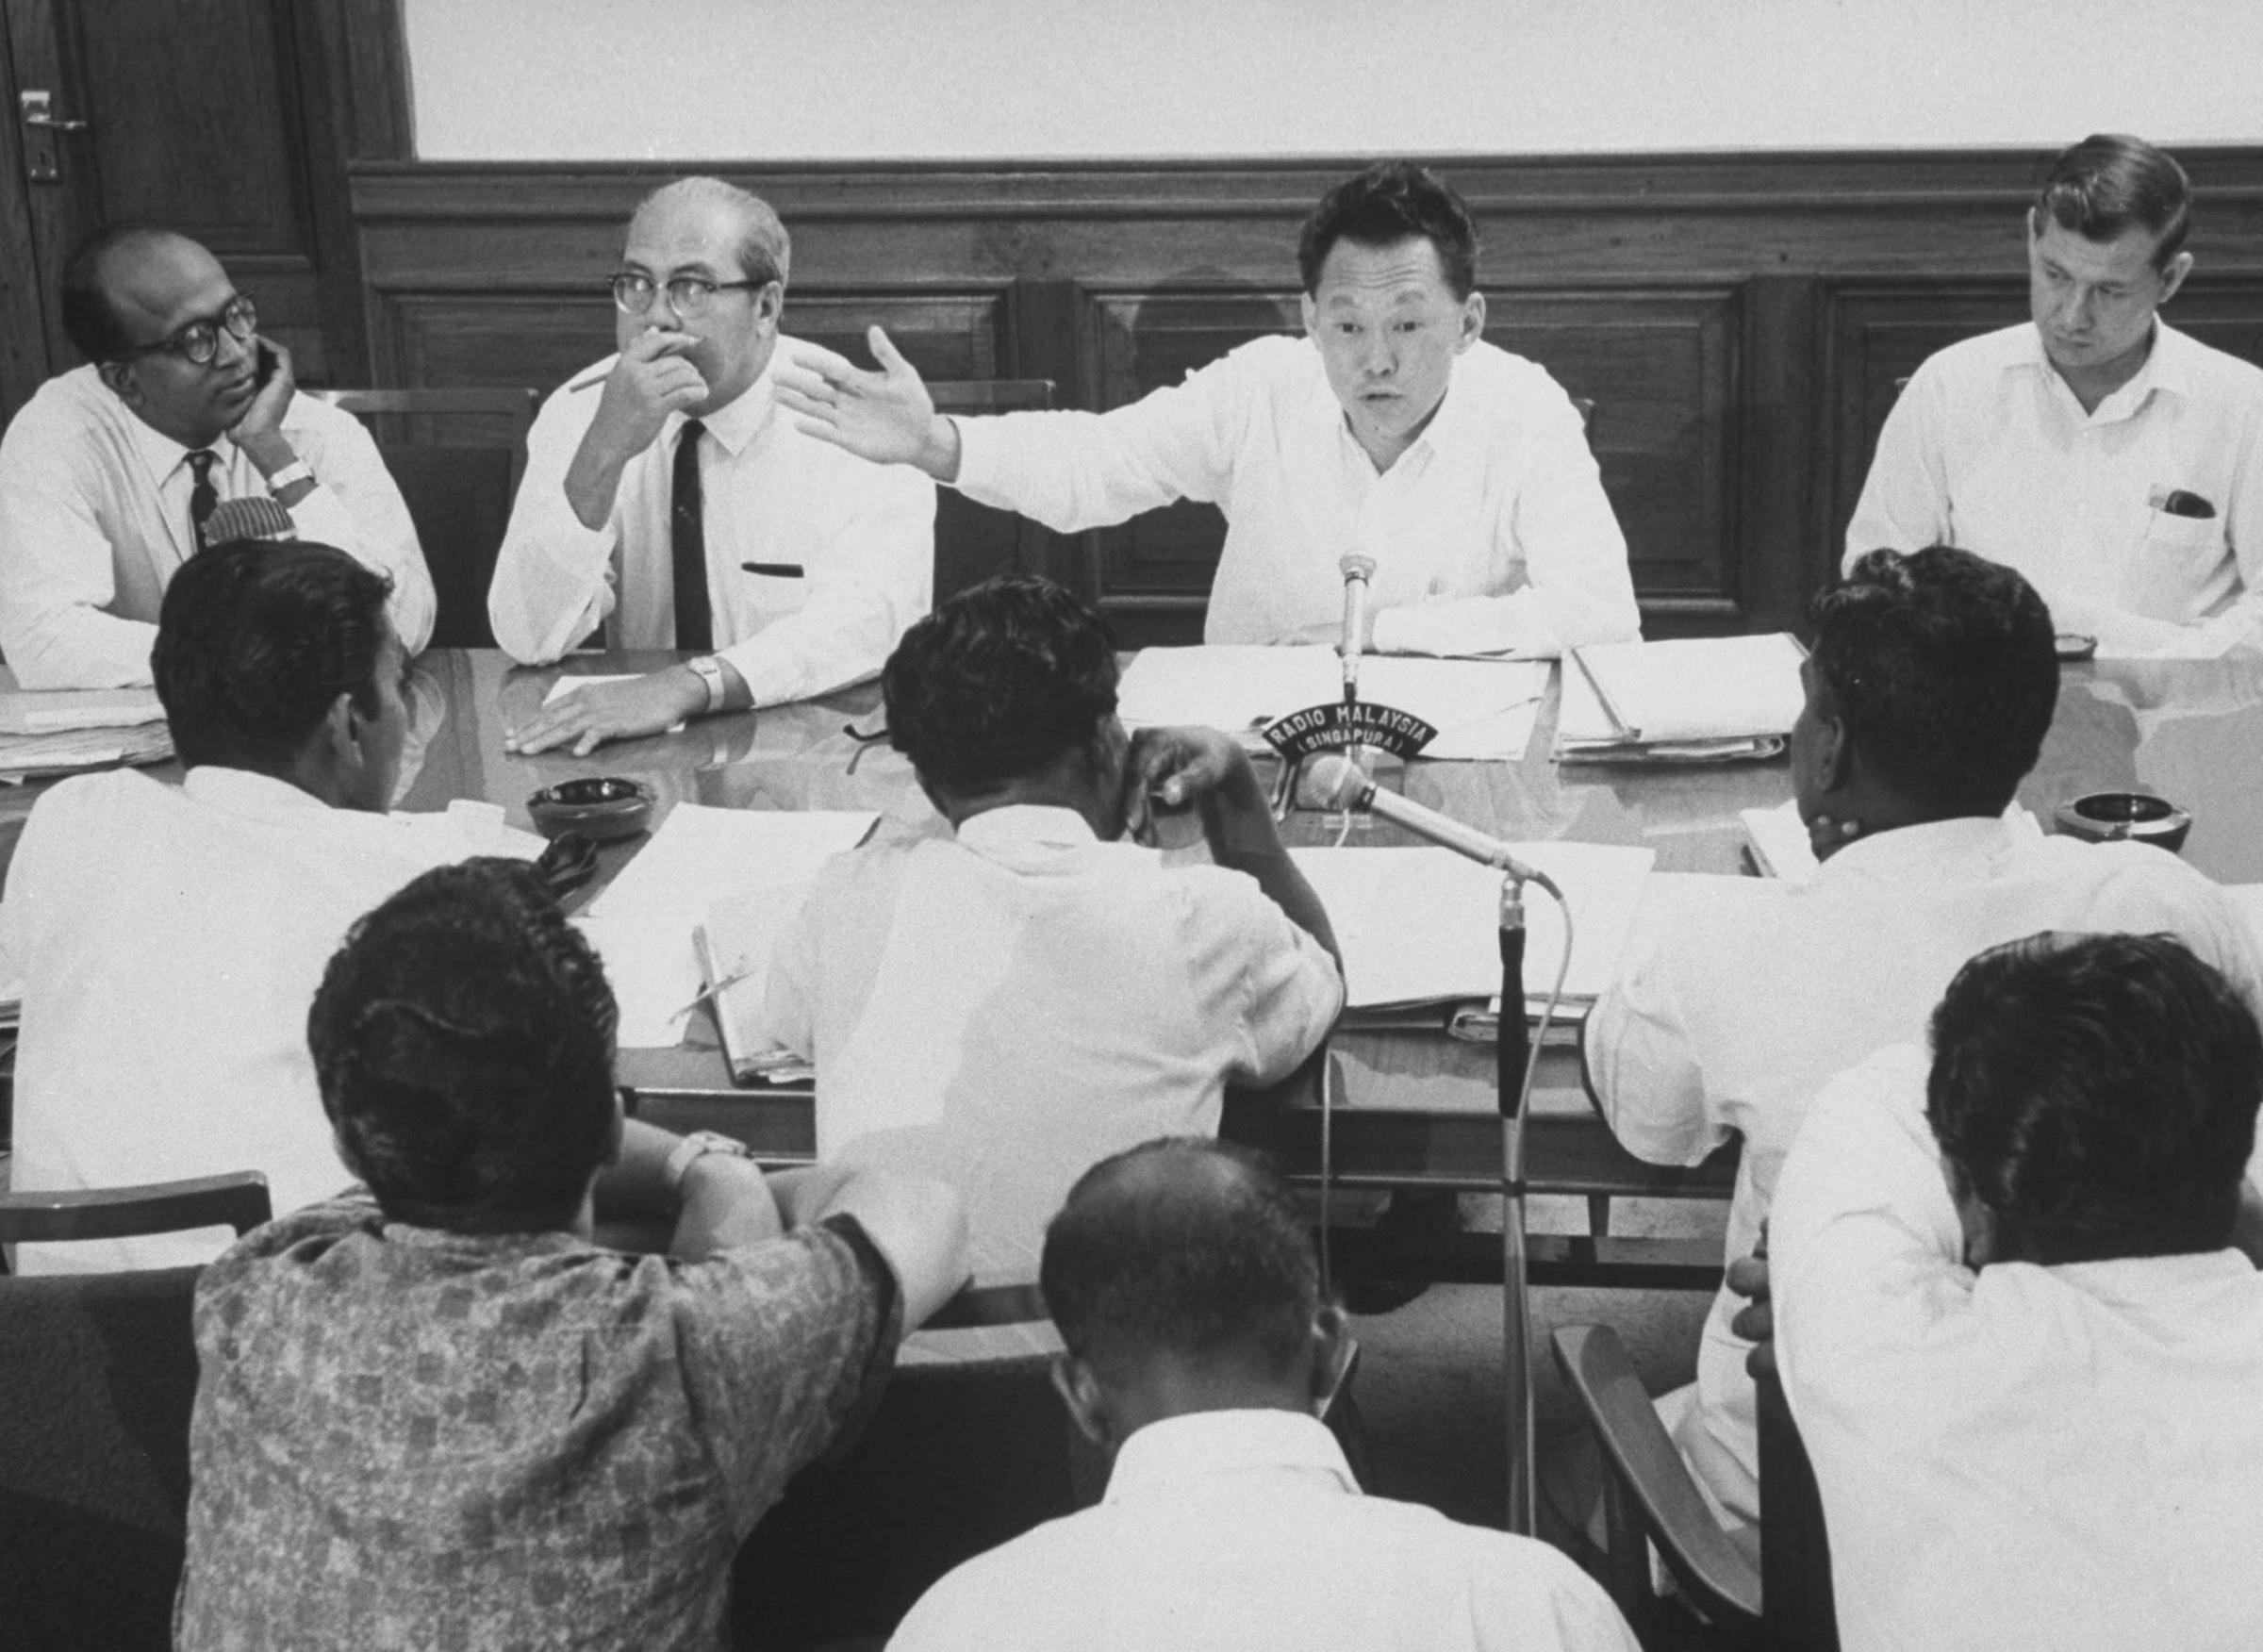 Prime Minister Kuan Yew Lee in conference with Labor leaders during strike threat in 1965.